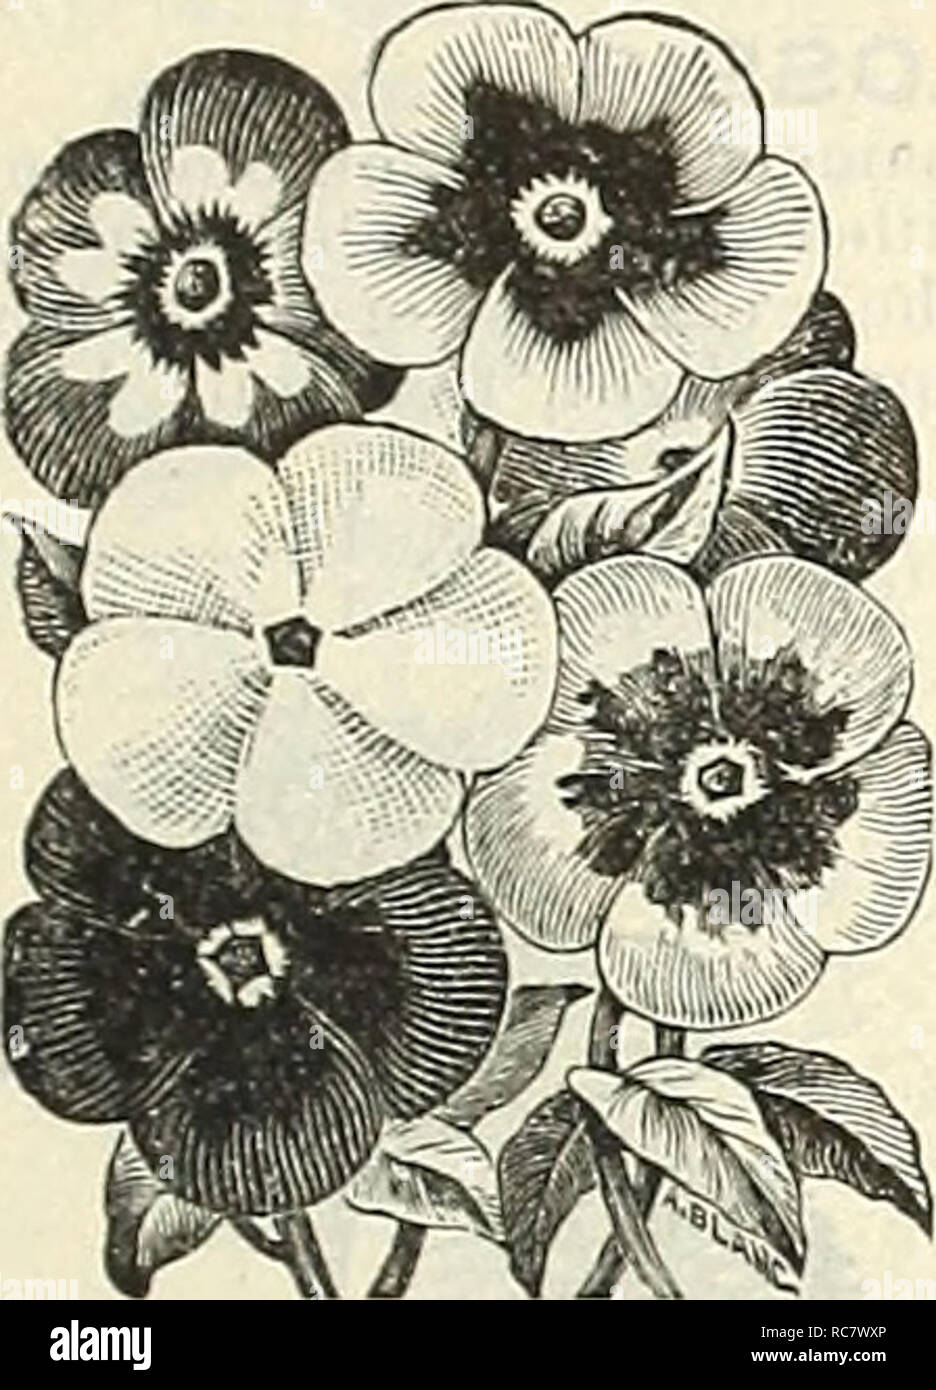 . Dreer's garden calendar for 1888. Seeds Catalogs; Nursery stock Catalogs; Gardening Catalogs; Flowers Seeds Catalogs. FOR THE FLOWER GARDEN. 67 PH LOXr-ContiMUed. 6328 P. Peach Blossom. Large flowers of a delicate salmon tint 10 6326â Radowitzi. Rose, striped white 10 ^330â Mixed. All colors. Per oz., $1.00 5 PH LOX DRU M MONDIGR AN Dl FLORA. An improvement on the old varieties in stronger, more compact growth, aud.larger flowers, with white cen- tres, admirably relieved by a dark violet eye; 1A feet. 6331 P. Alba'Pura. Pure white 10 6334 â Carminea Alba Oculata. Rosy carmine, white eve â â¢ Stock Photo